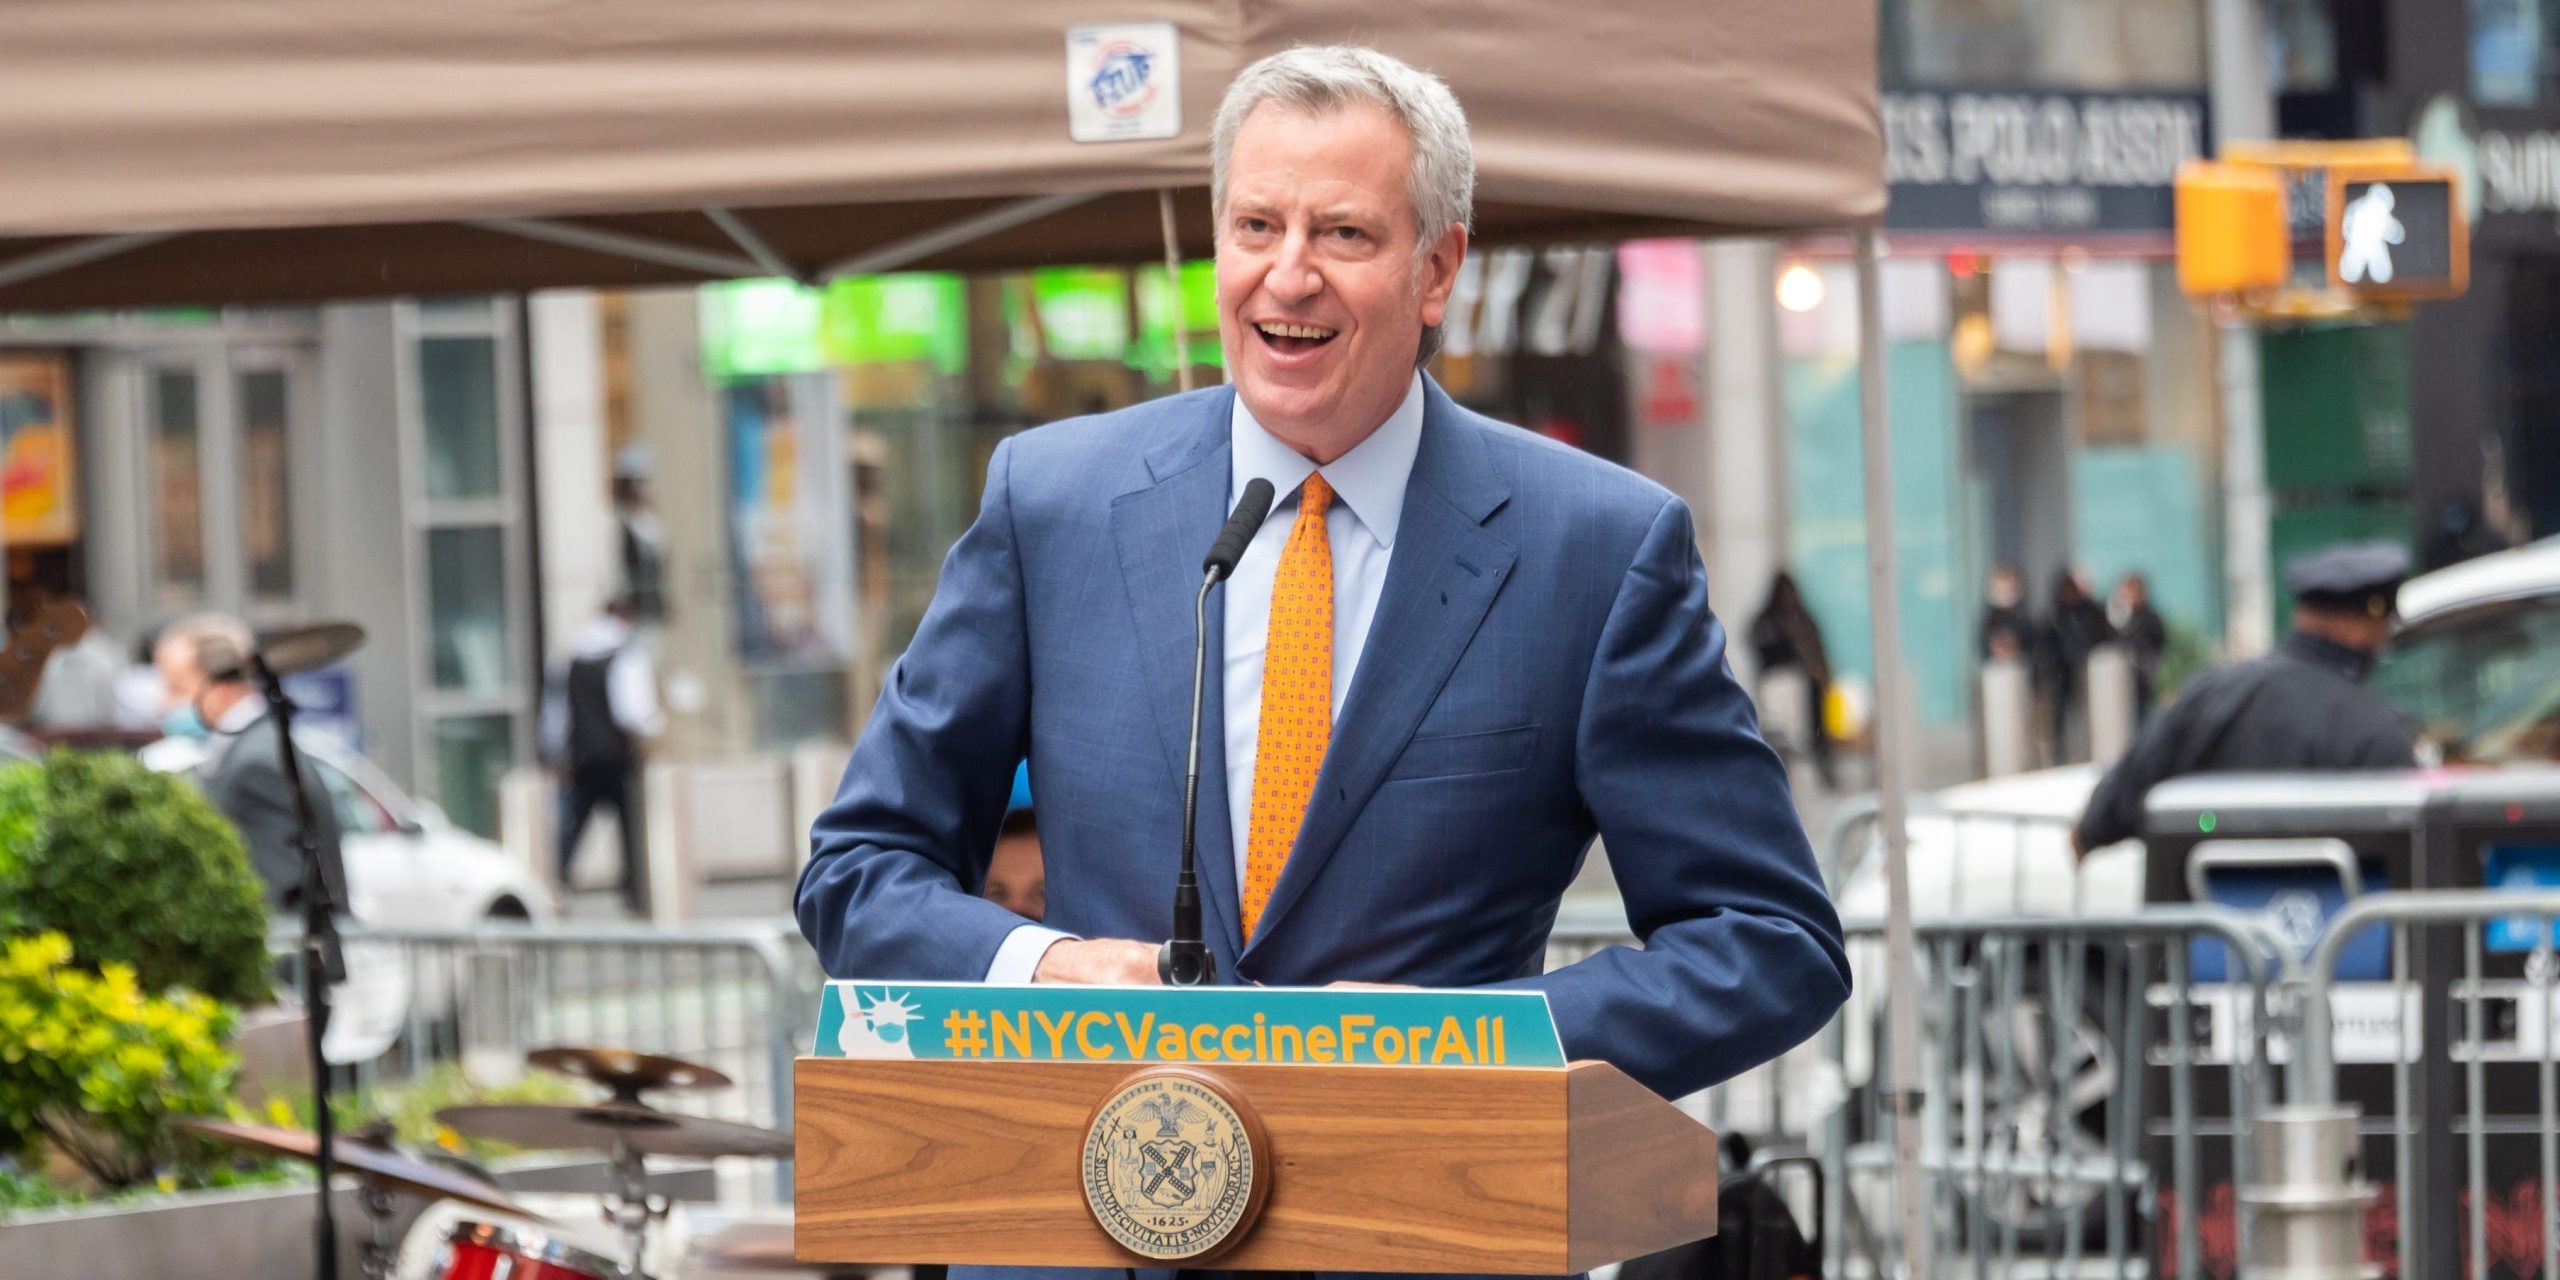 Mayor of New York City Bill de Blasio speaks during the opening of a vaccination center for Broadway workers in Times Square on April 12, 2021 in New York City.